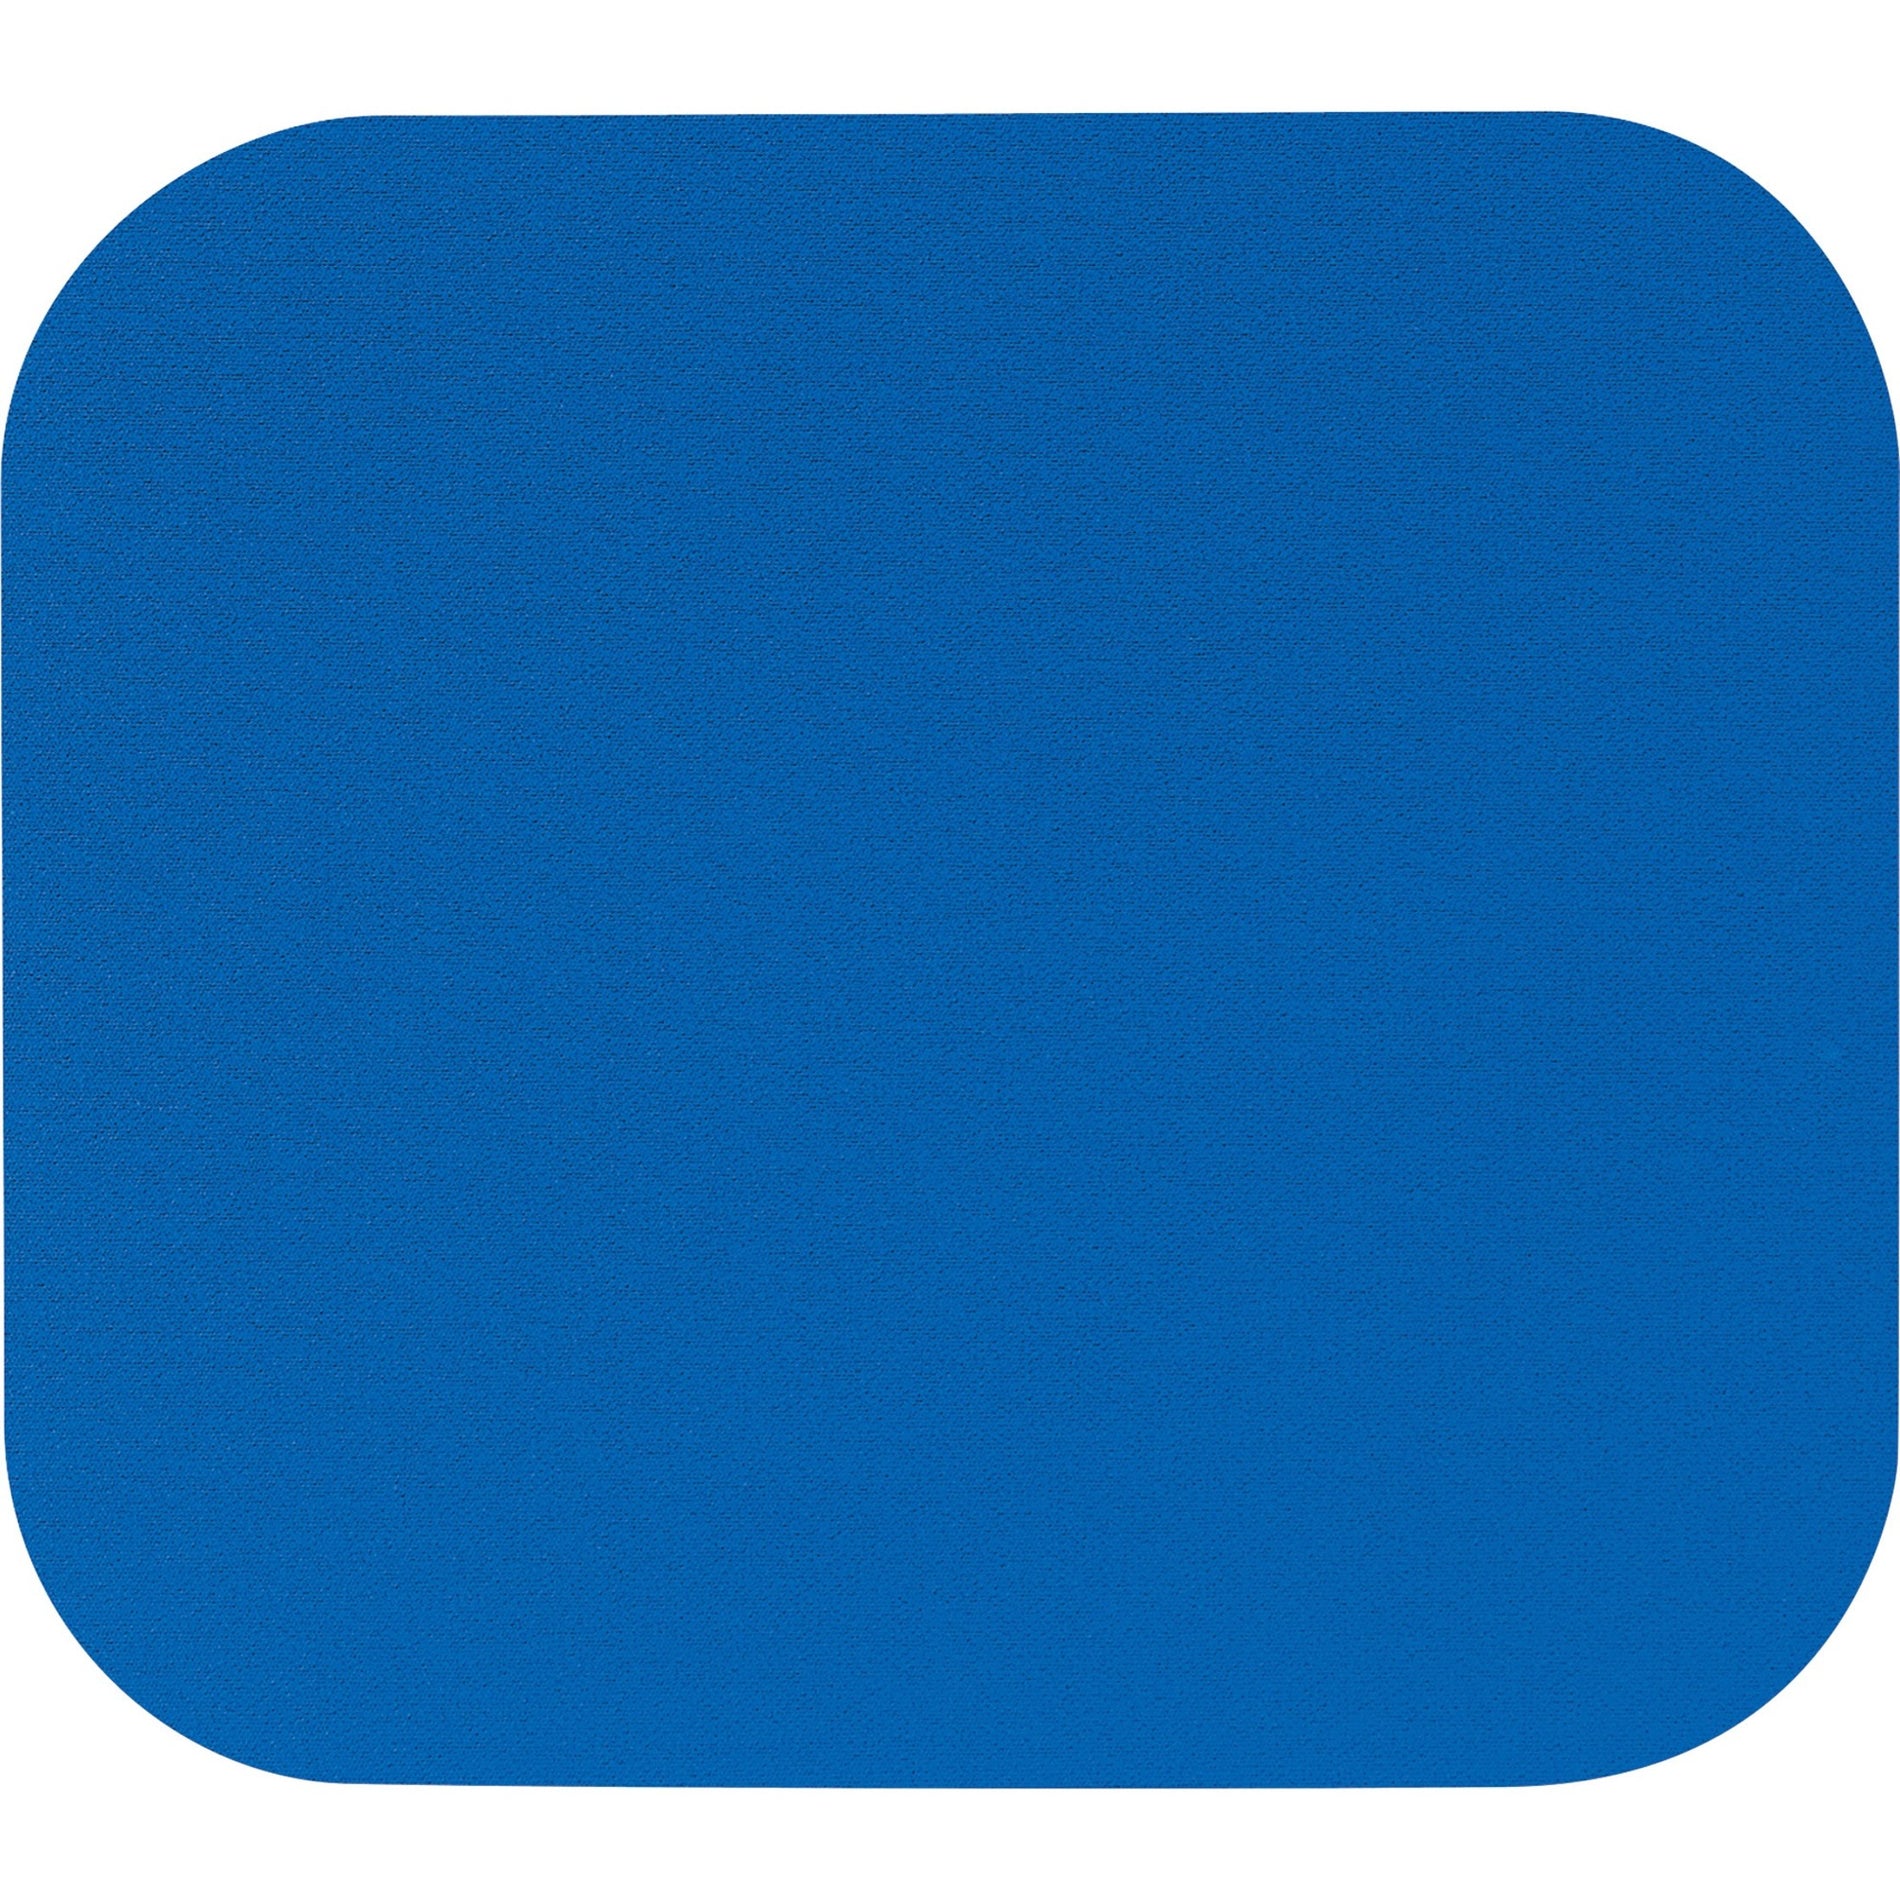 Fellowes 58021 Mouse Pad, Nonskid, Blue, Durable, Scratch Resistant